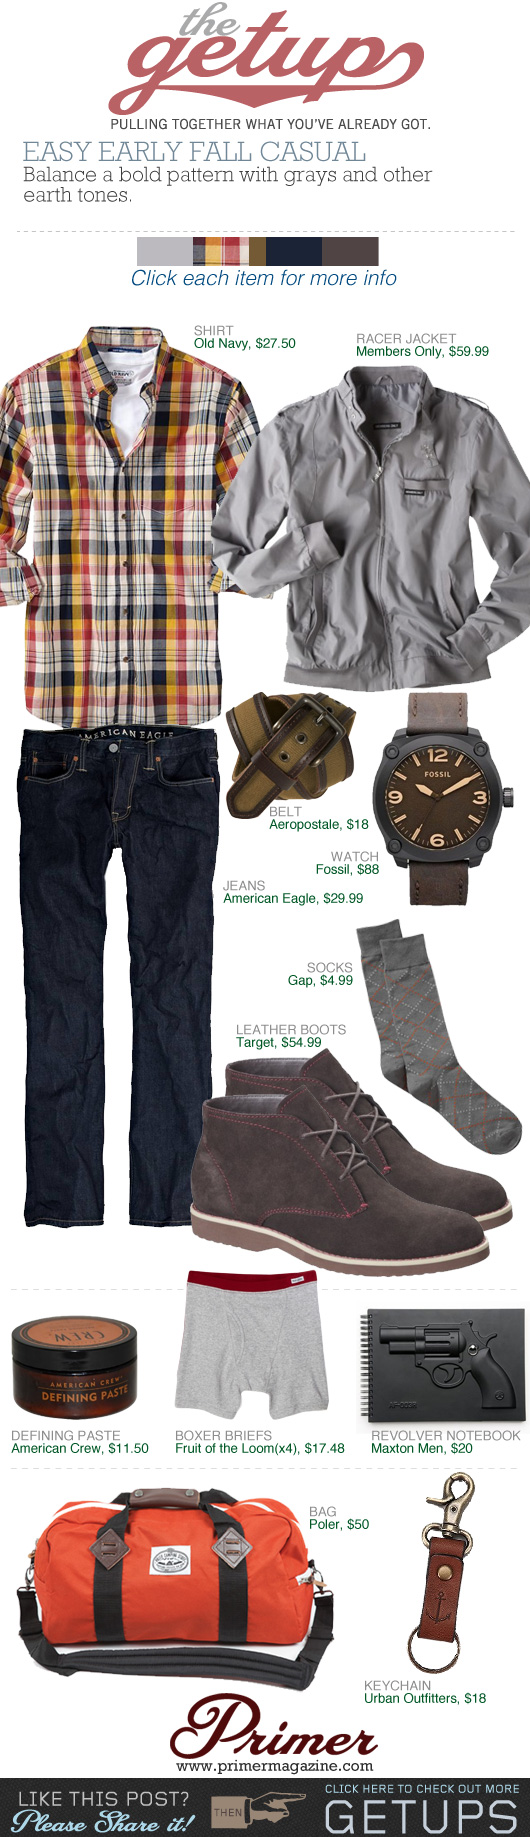 The Getup Fall Casual gray jacket, plaid shirt, dark jeans, brown boots